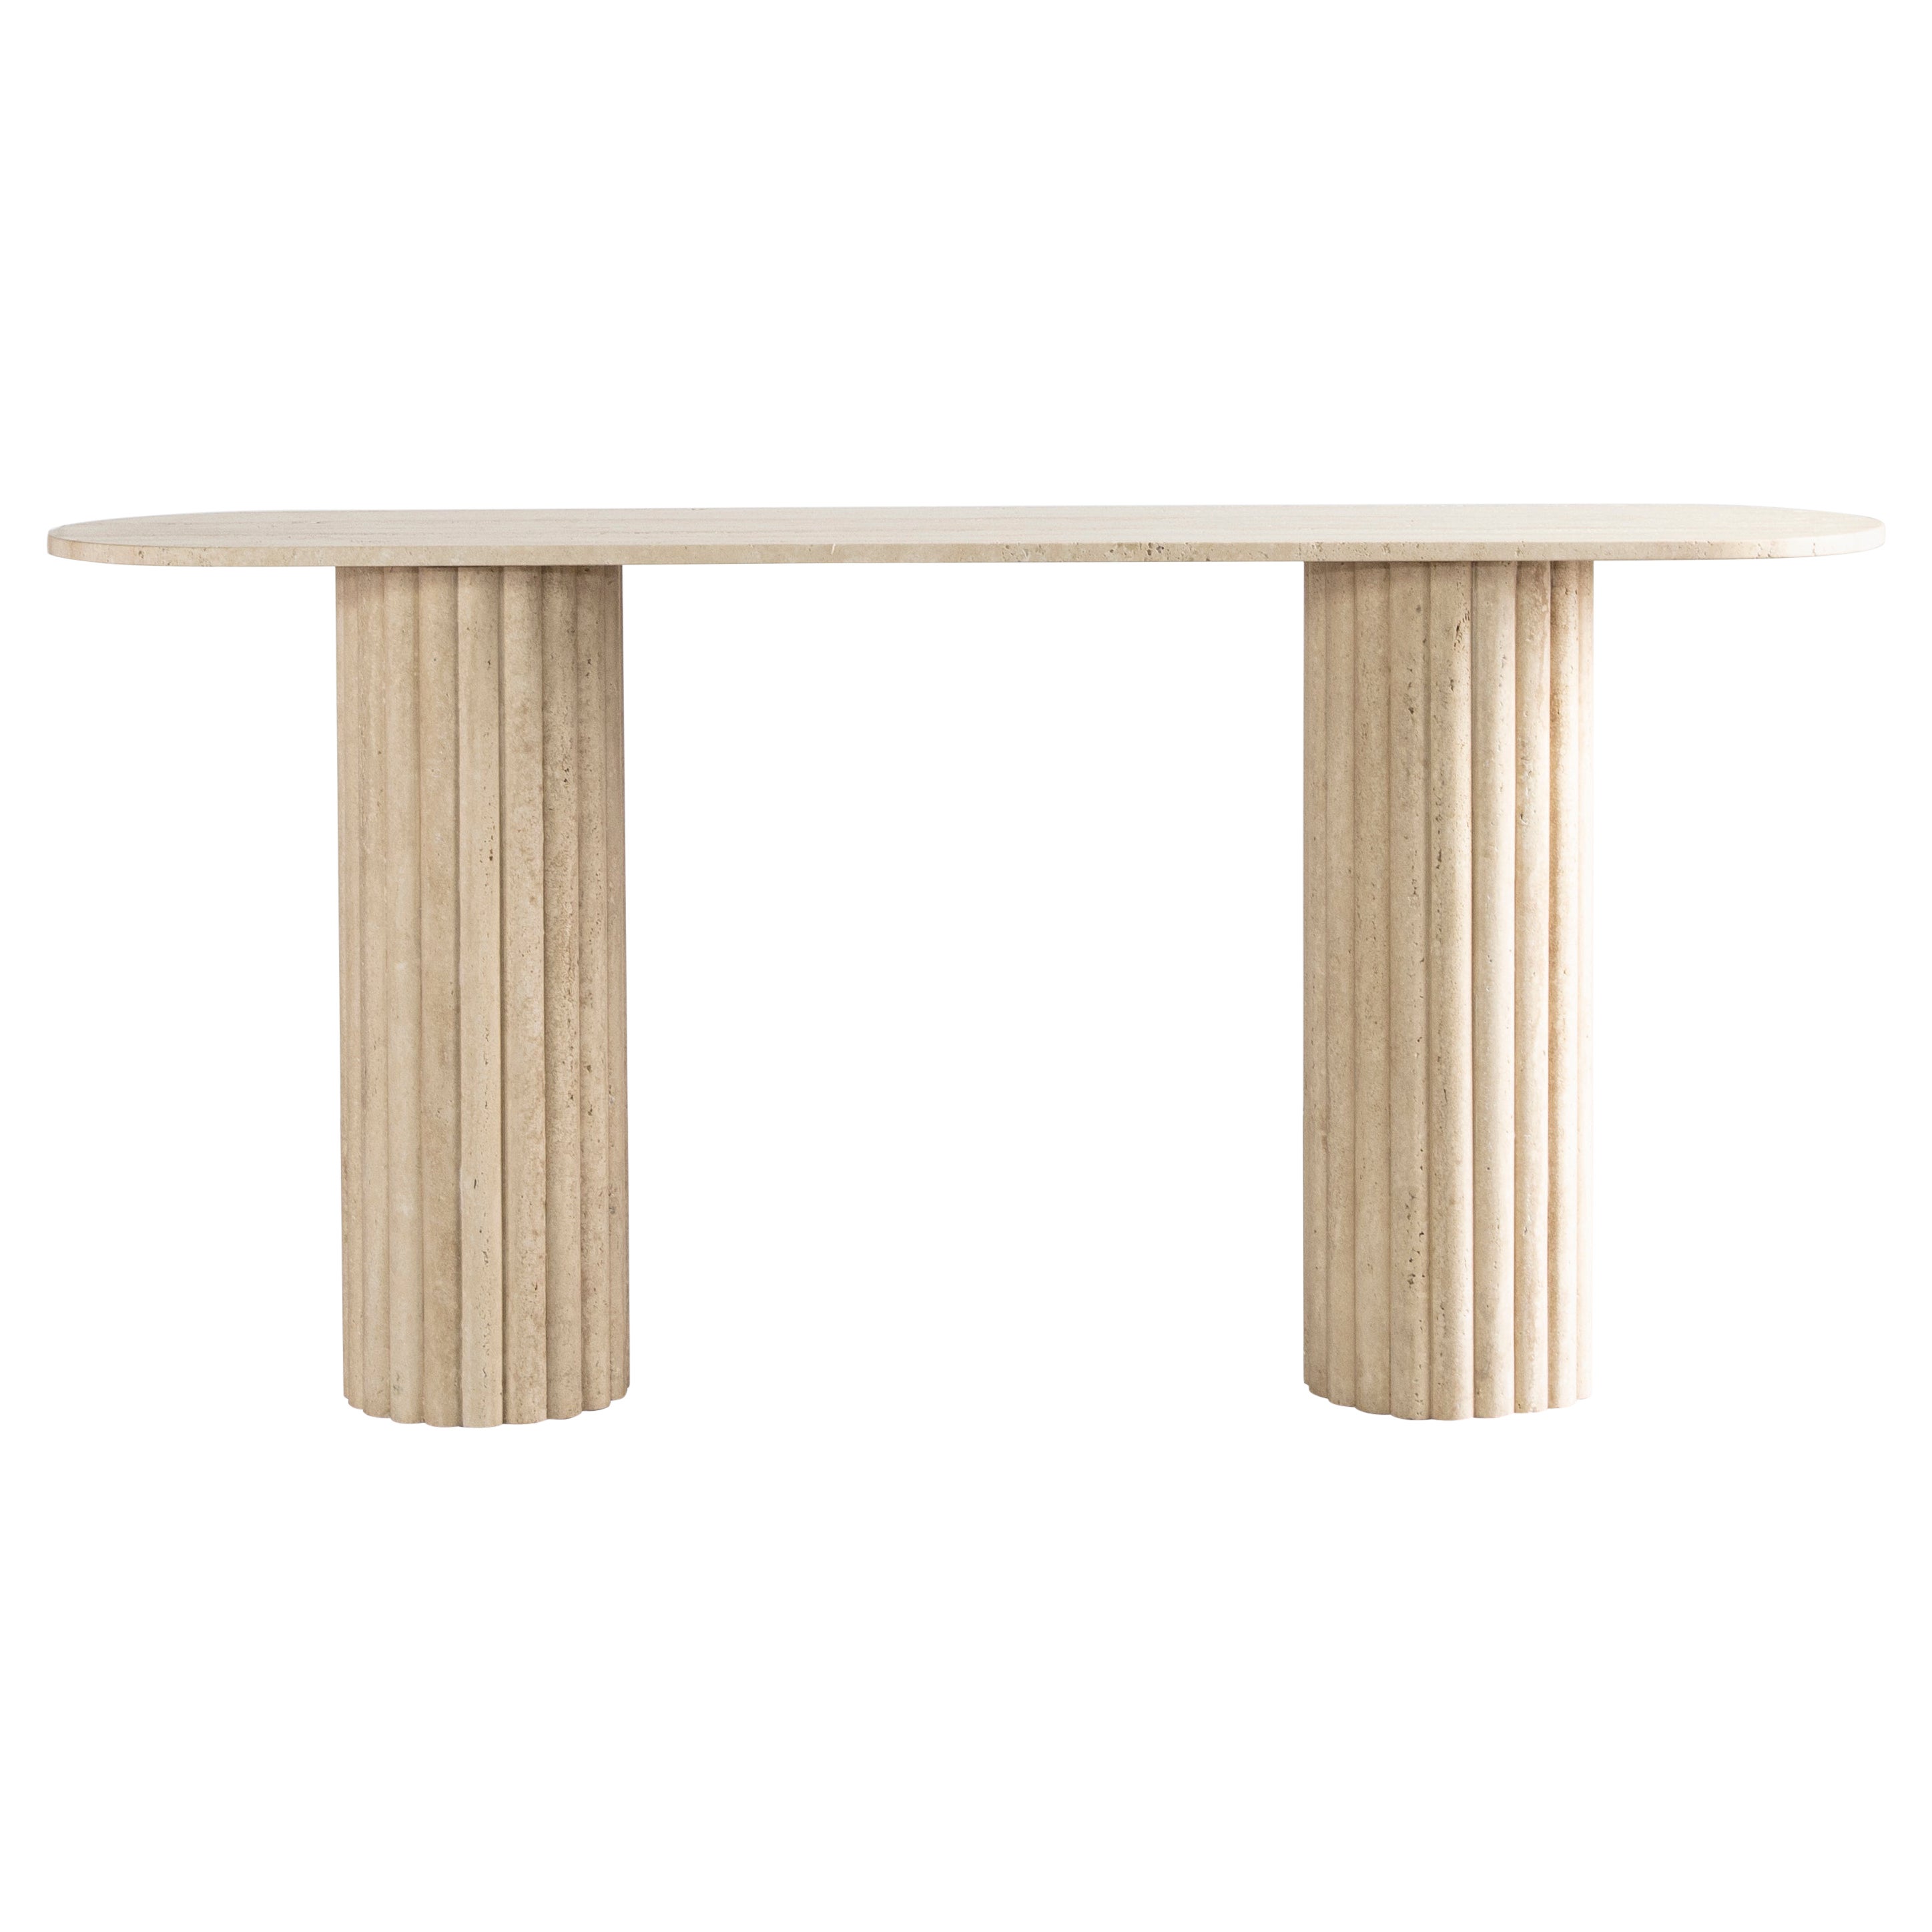 Rima Console Table in Travertine Marble, Made in Mexico by Peca For Sale